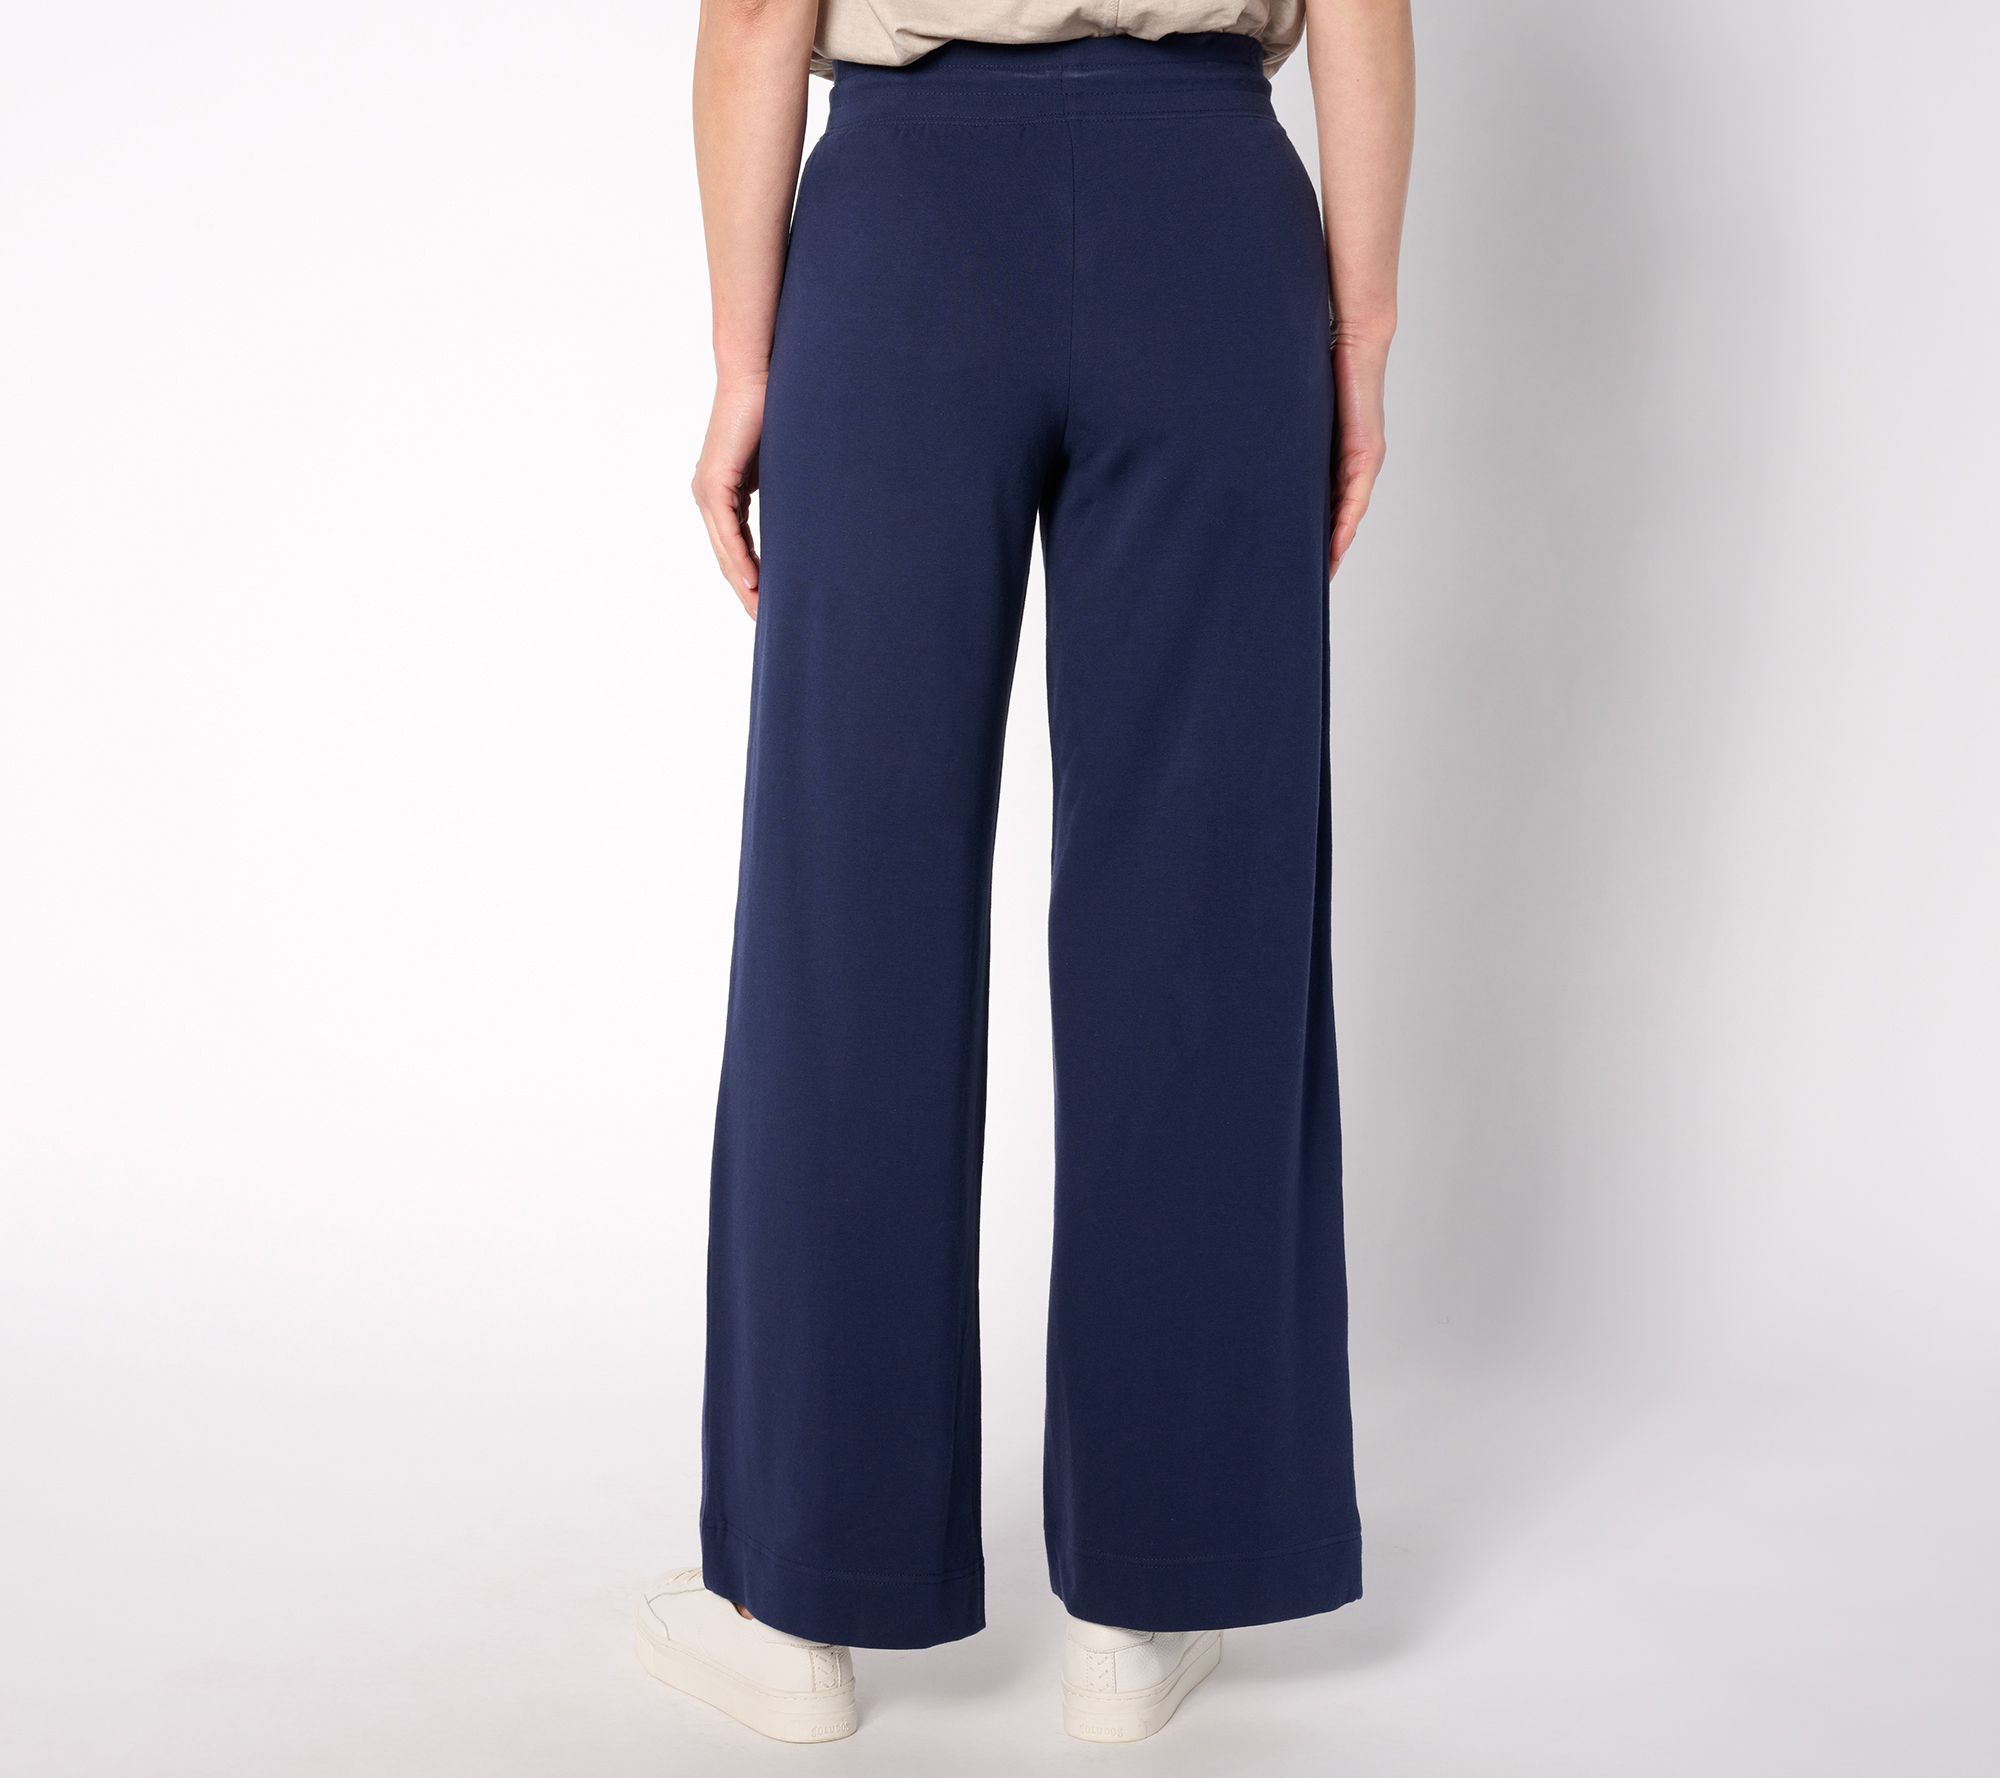 Denim & Co. Active French Terry Wide Leg Pant with Seam Detail - QVC.com